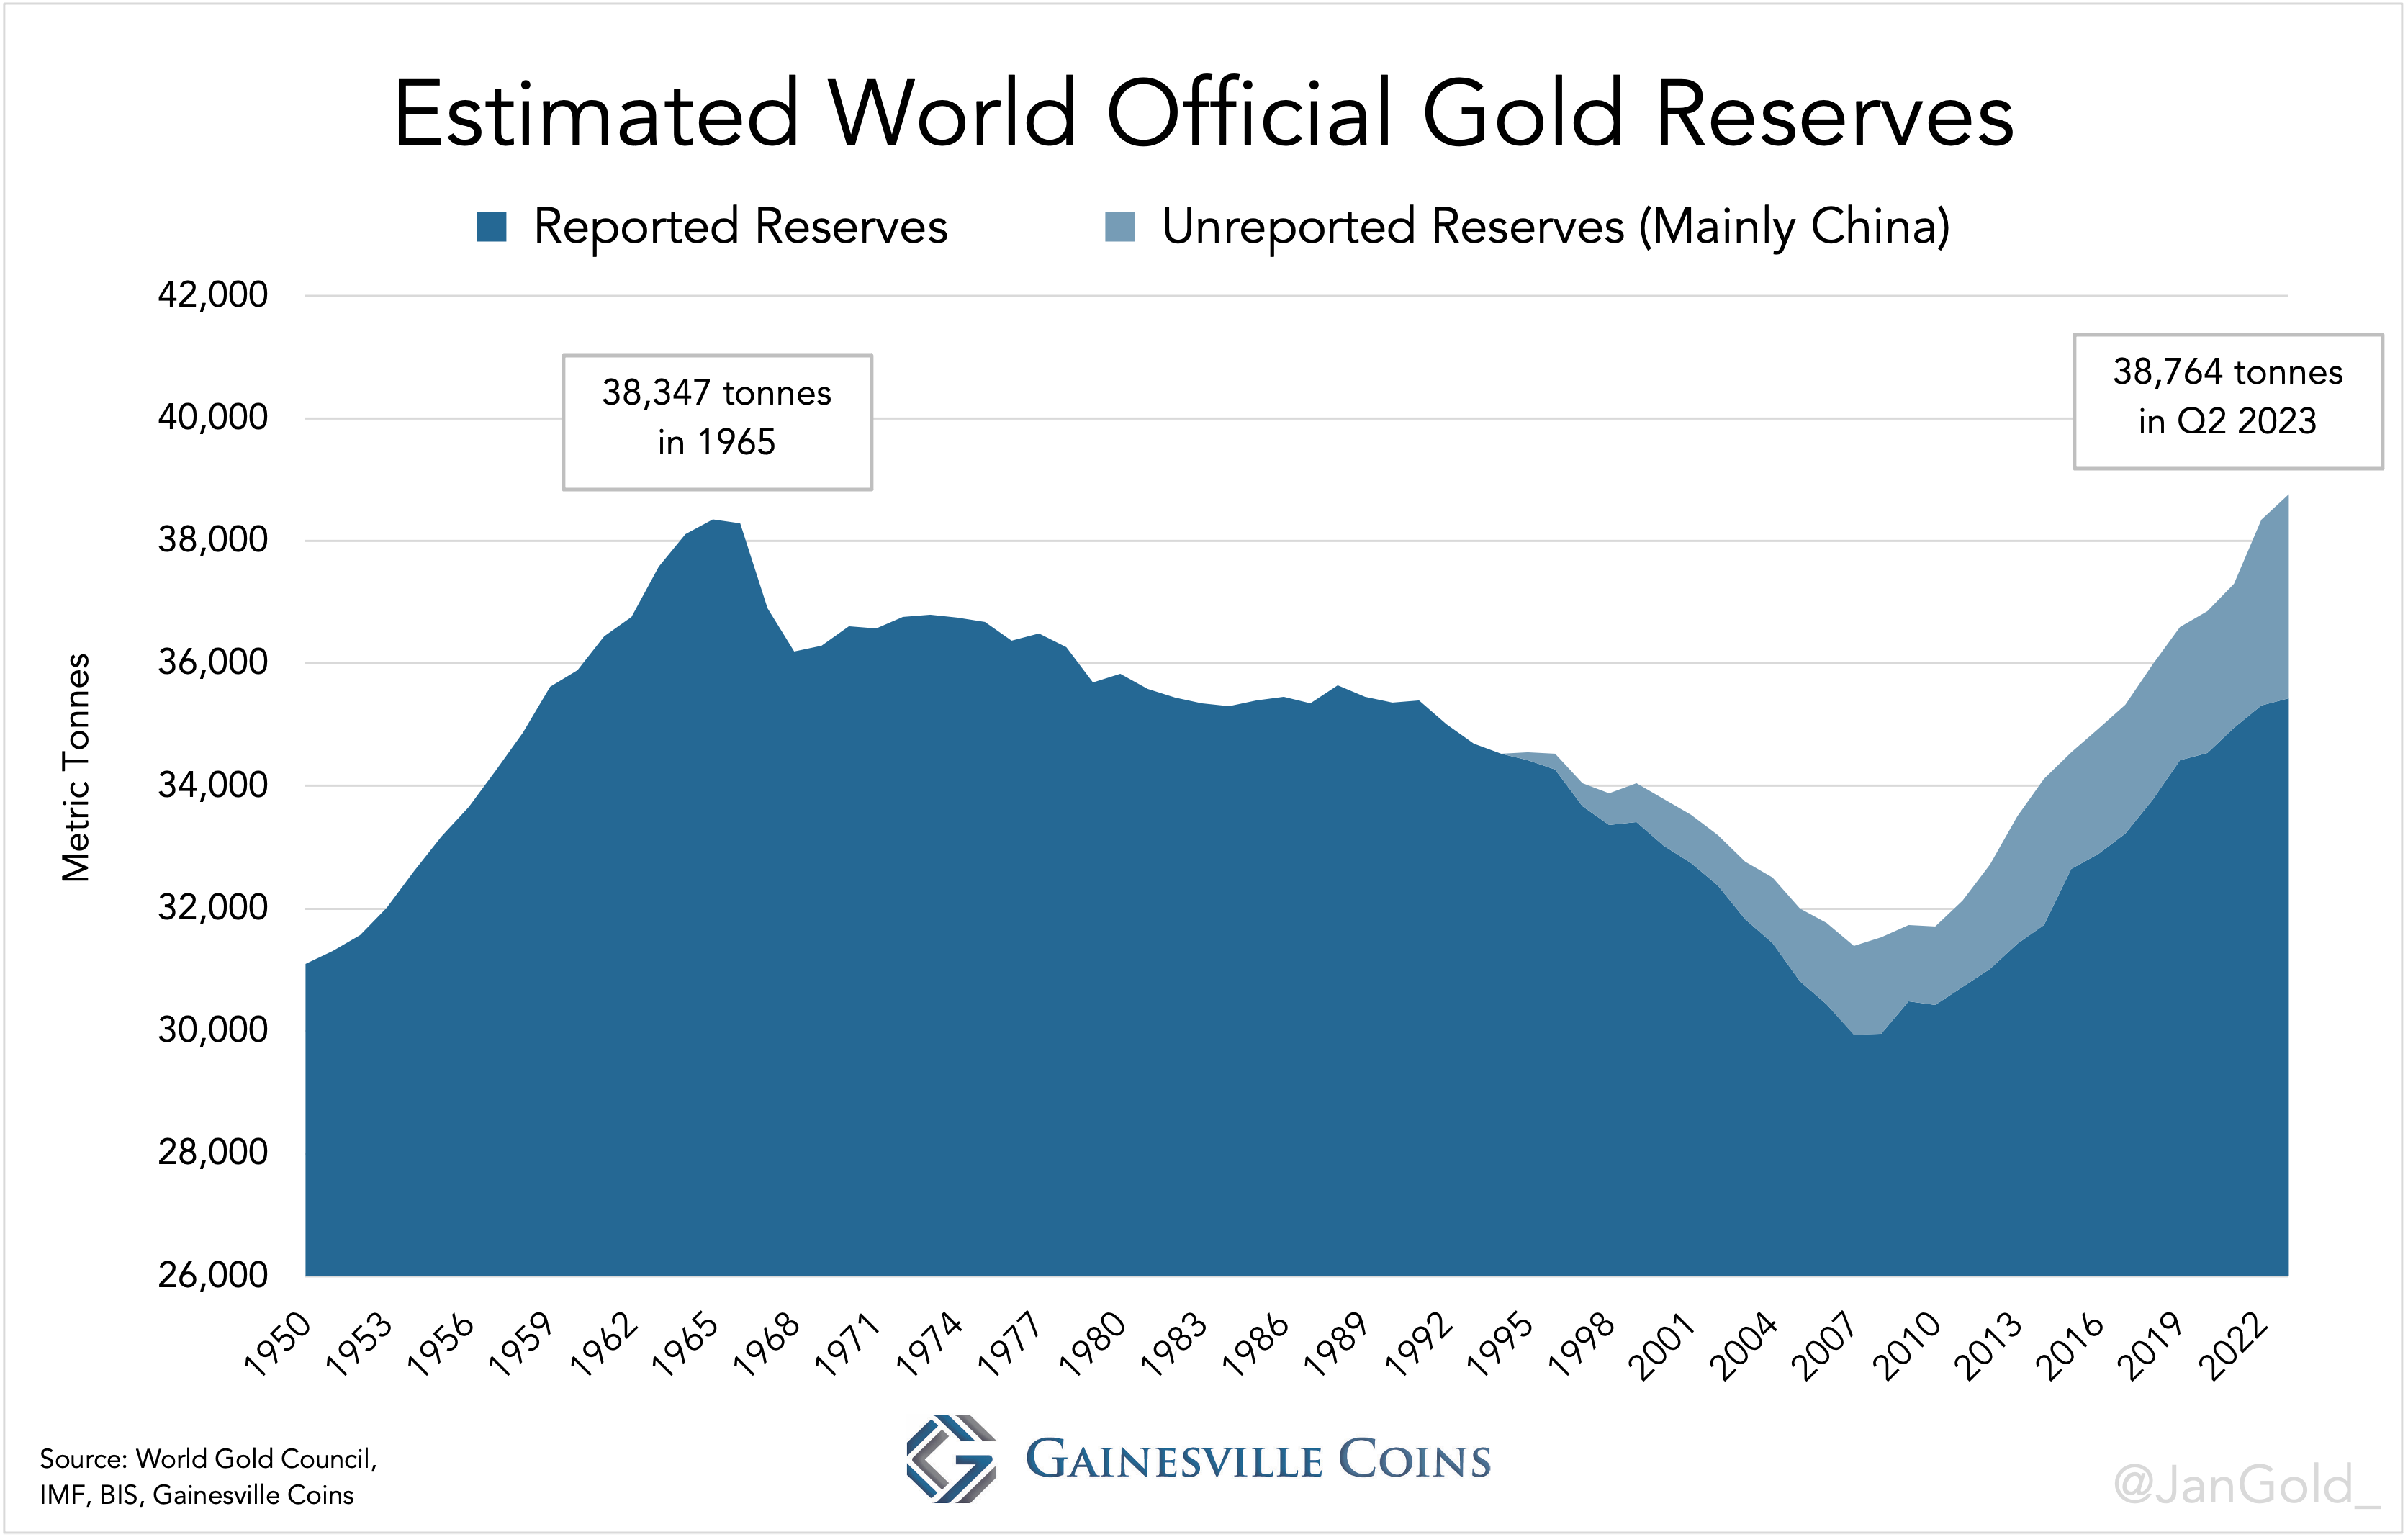 Estimated World Official Gold Reserves